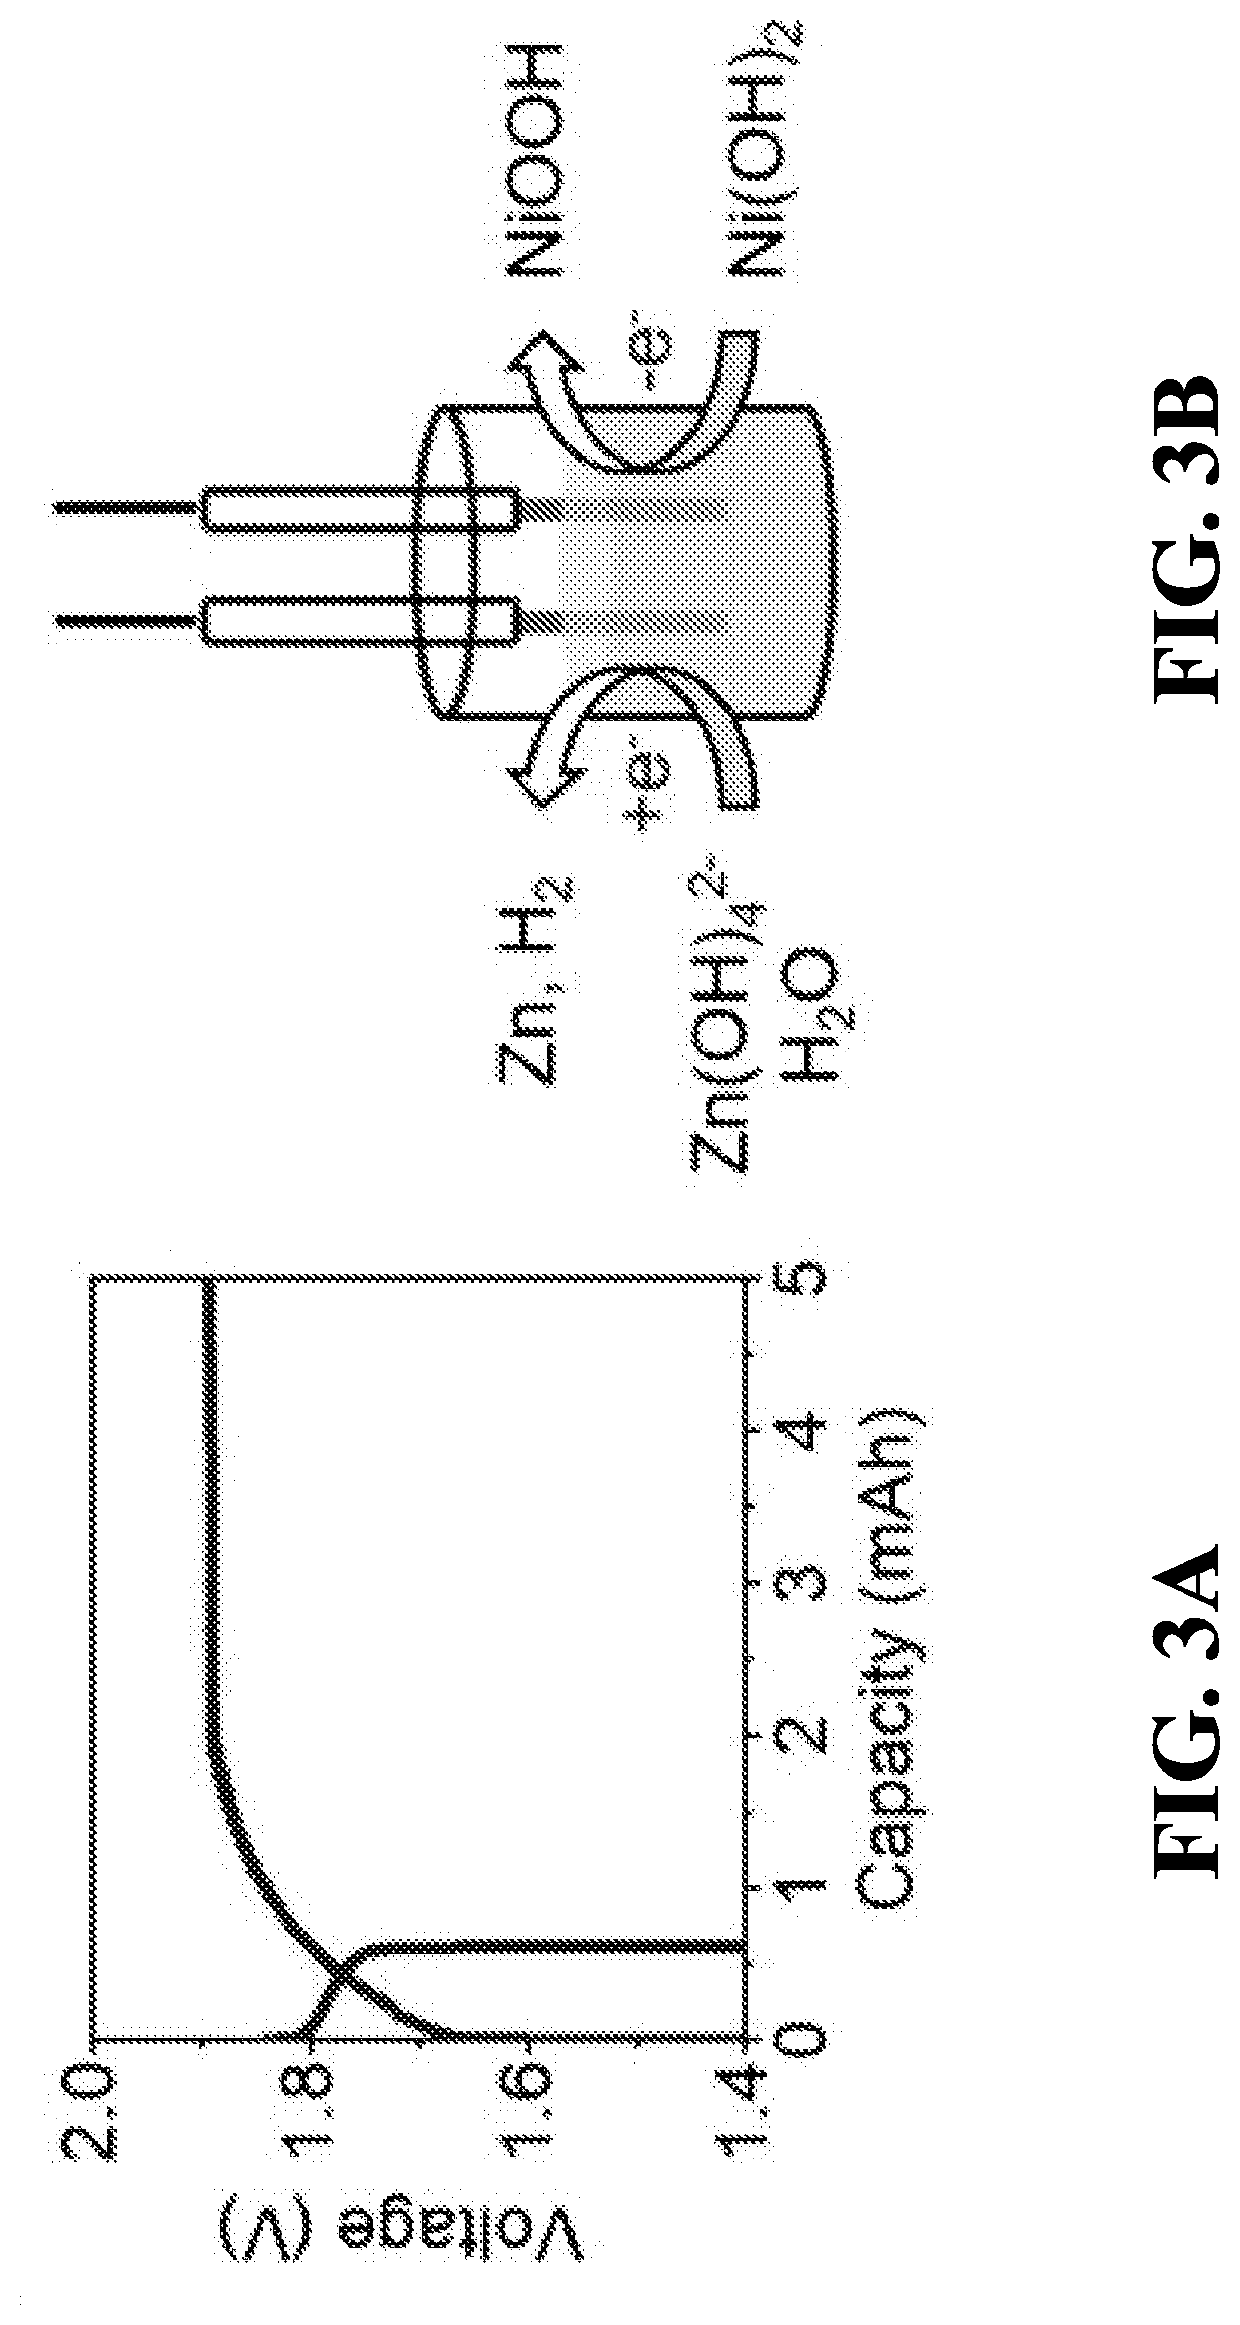 Deeply Rechargeable Battery Systems and Methods